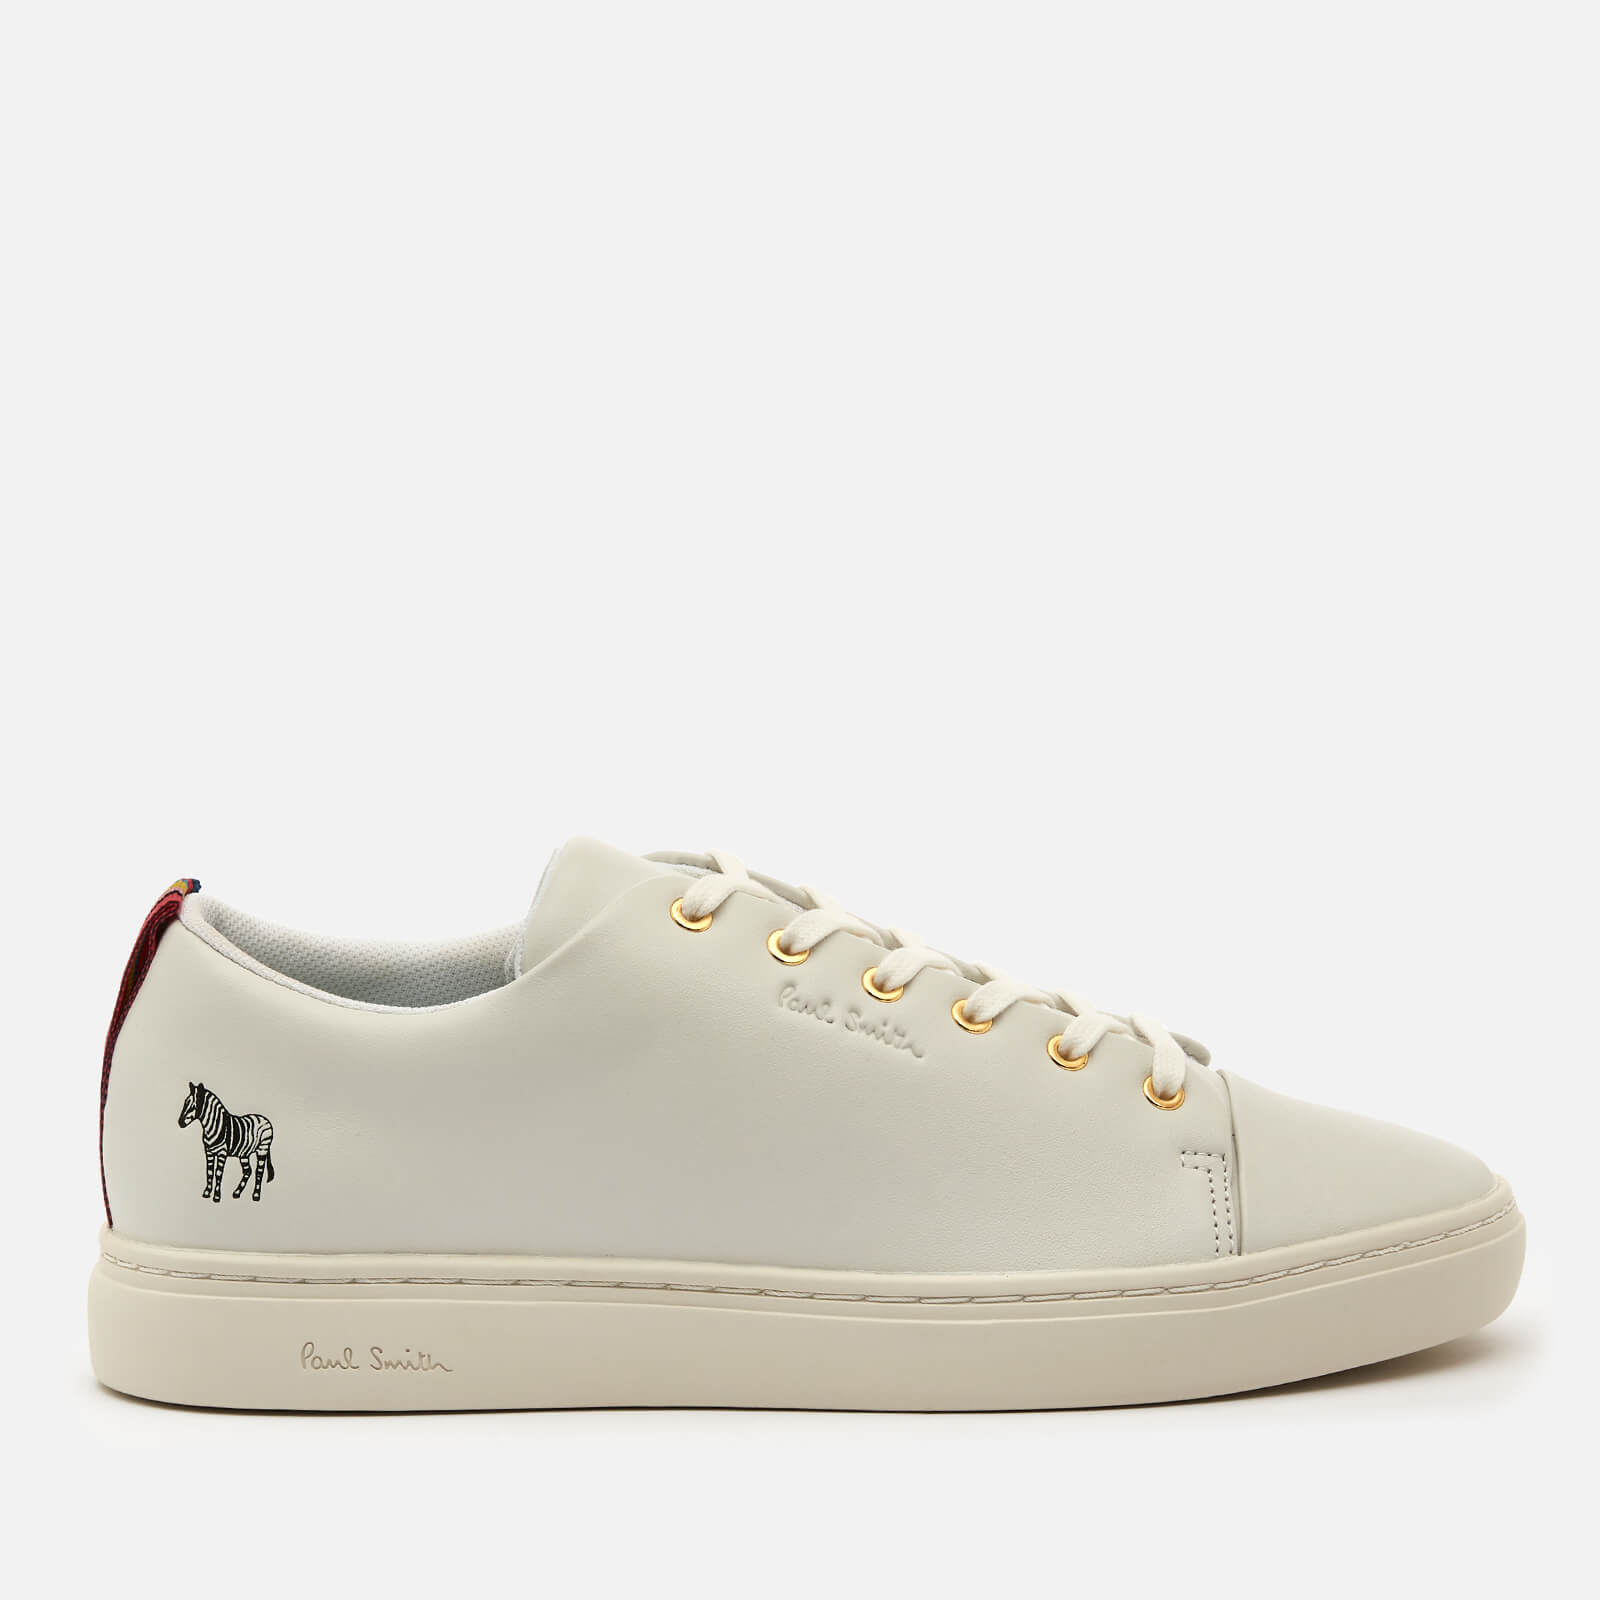 Paul Smith Women's Lee Leather Cupsole Trainers - White - UK 8